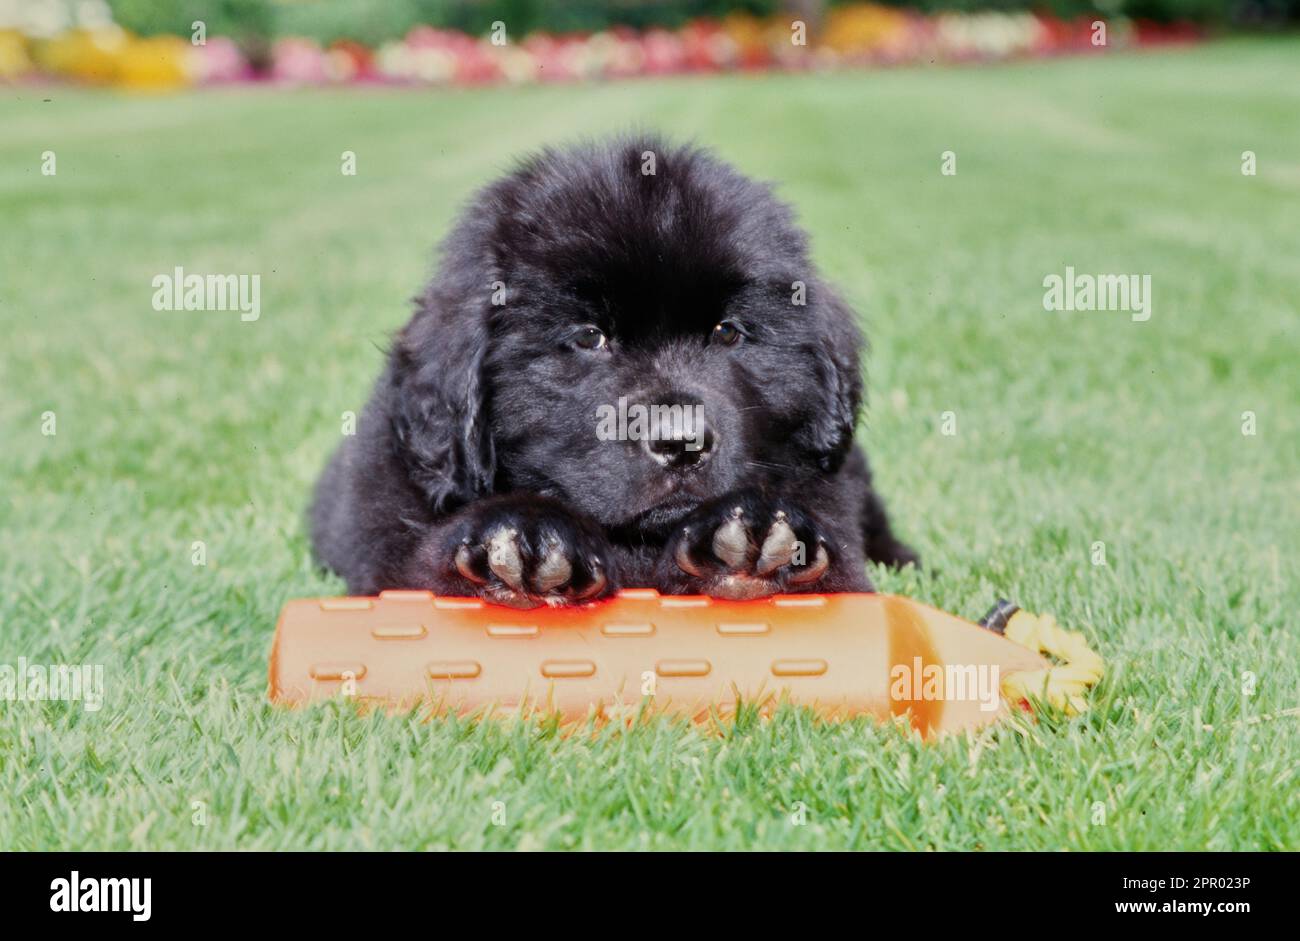 Fluffy Newfoundland puppy sitting on lawn resting on red floating toy Stock Photo